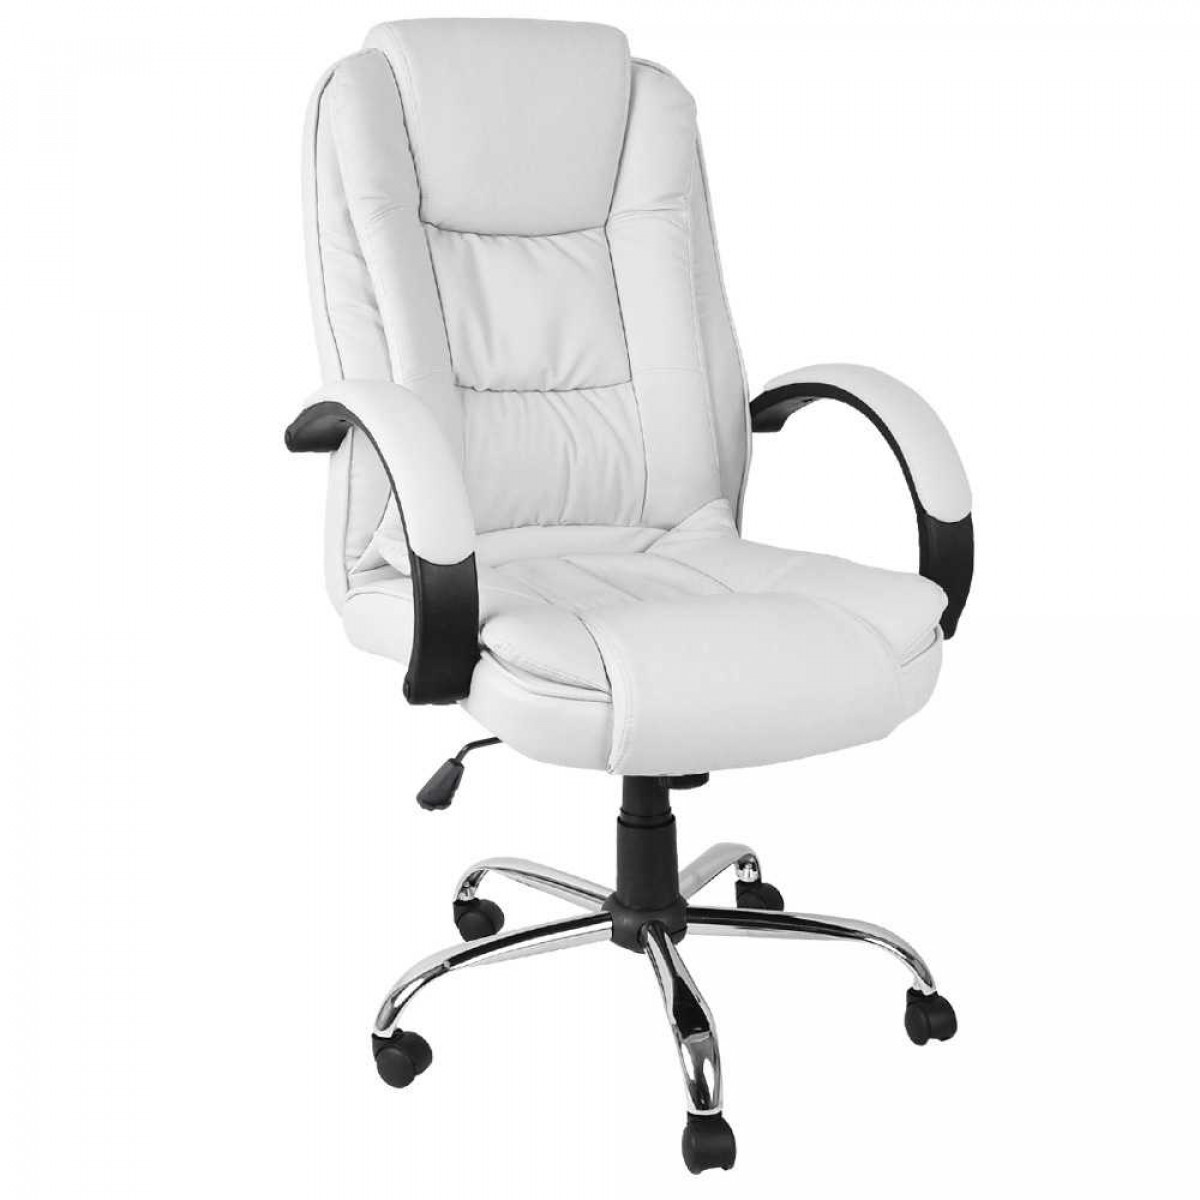 Best ideas about White Computer Chair
. Save or Pin Executive PU Leather fice puter Chair White Now.